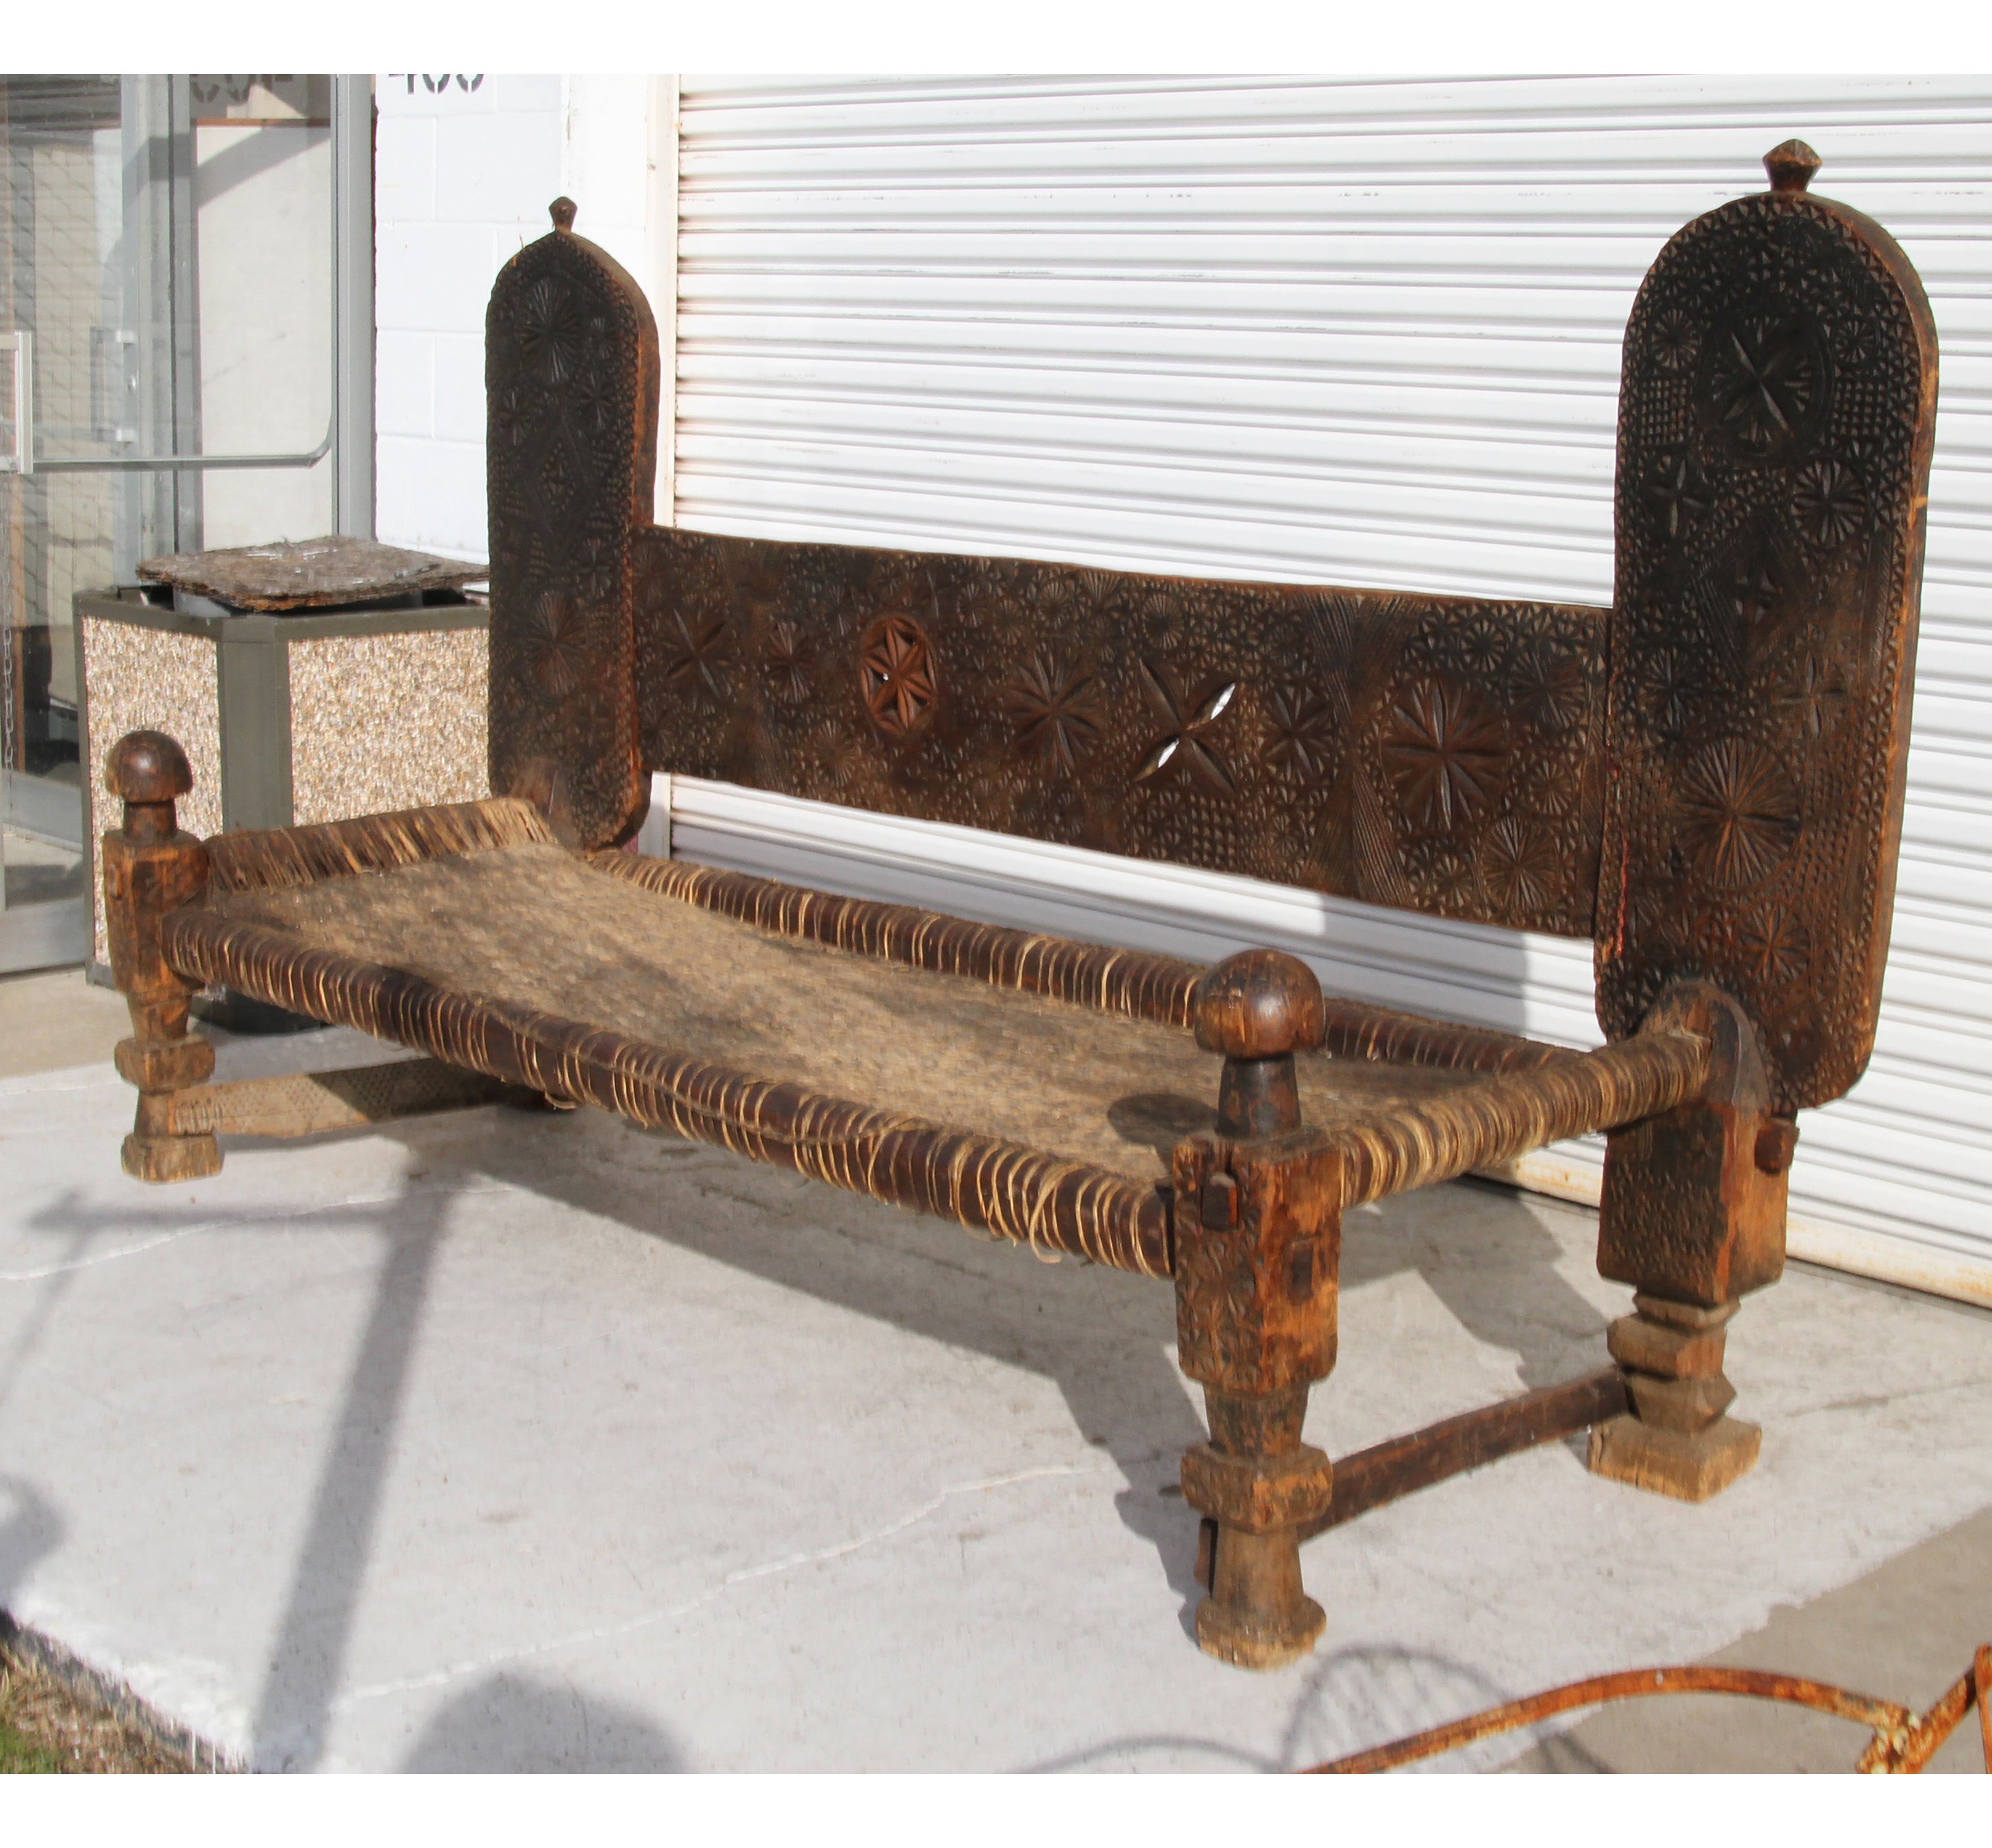 19th century Swat Valley bench with carved back in geometric patterns, large front legs with carved finials, and a woven seat. 
 
Measures: Width: 104”( headboard )
Length: 91” ( sitting area )
Depth: 36”.

  